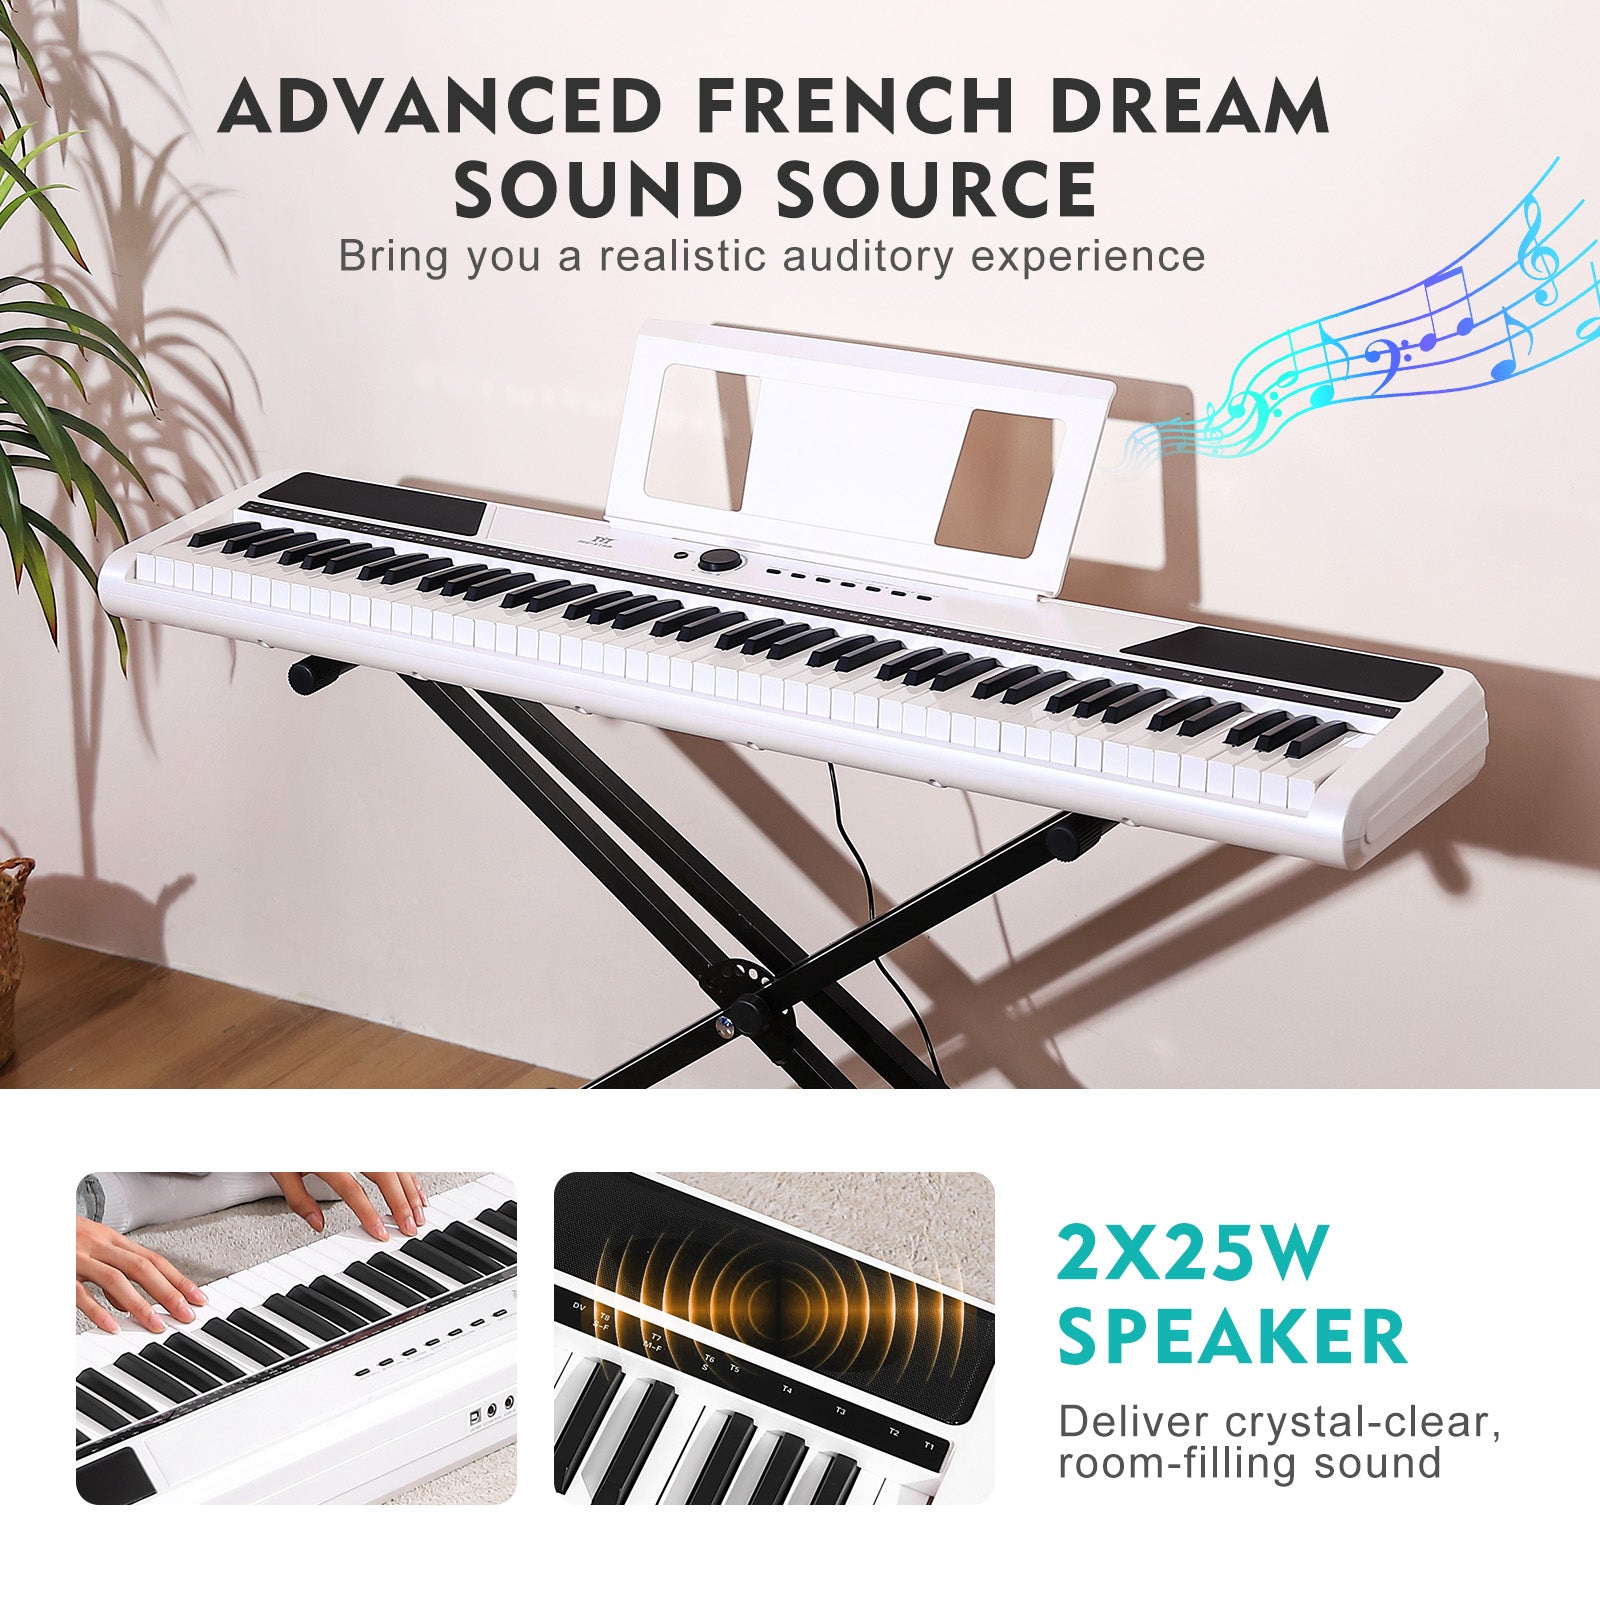 MUSTAR MEP-1400, 88 keys Digital Piano, Semi Weighted Keyboard Piano, Electronic Keyboards for Beginners, Sustain Pedal, USB/MIDI/Bluetooth, ABS, 128 Rhythms, 2 built-in 25W Stereo Speakers, White